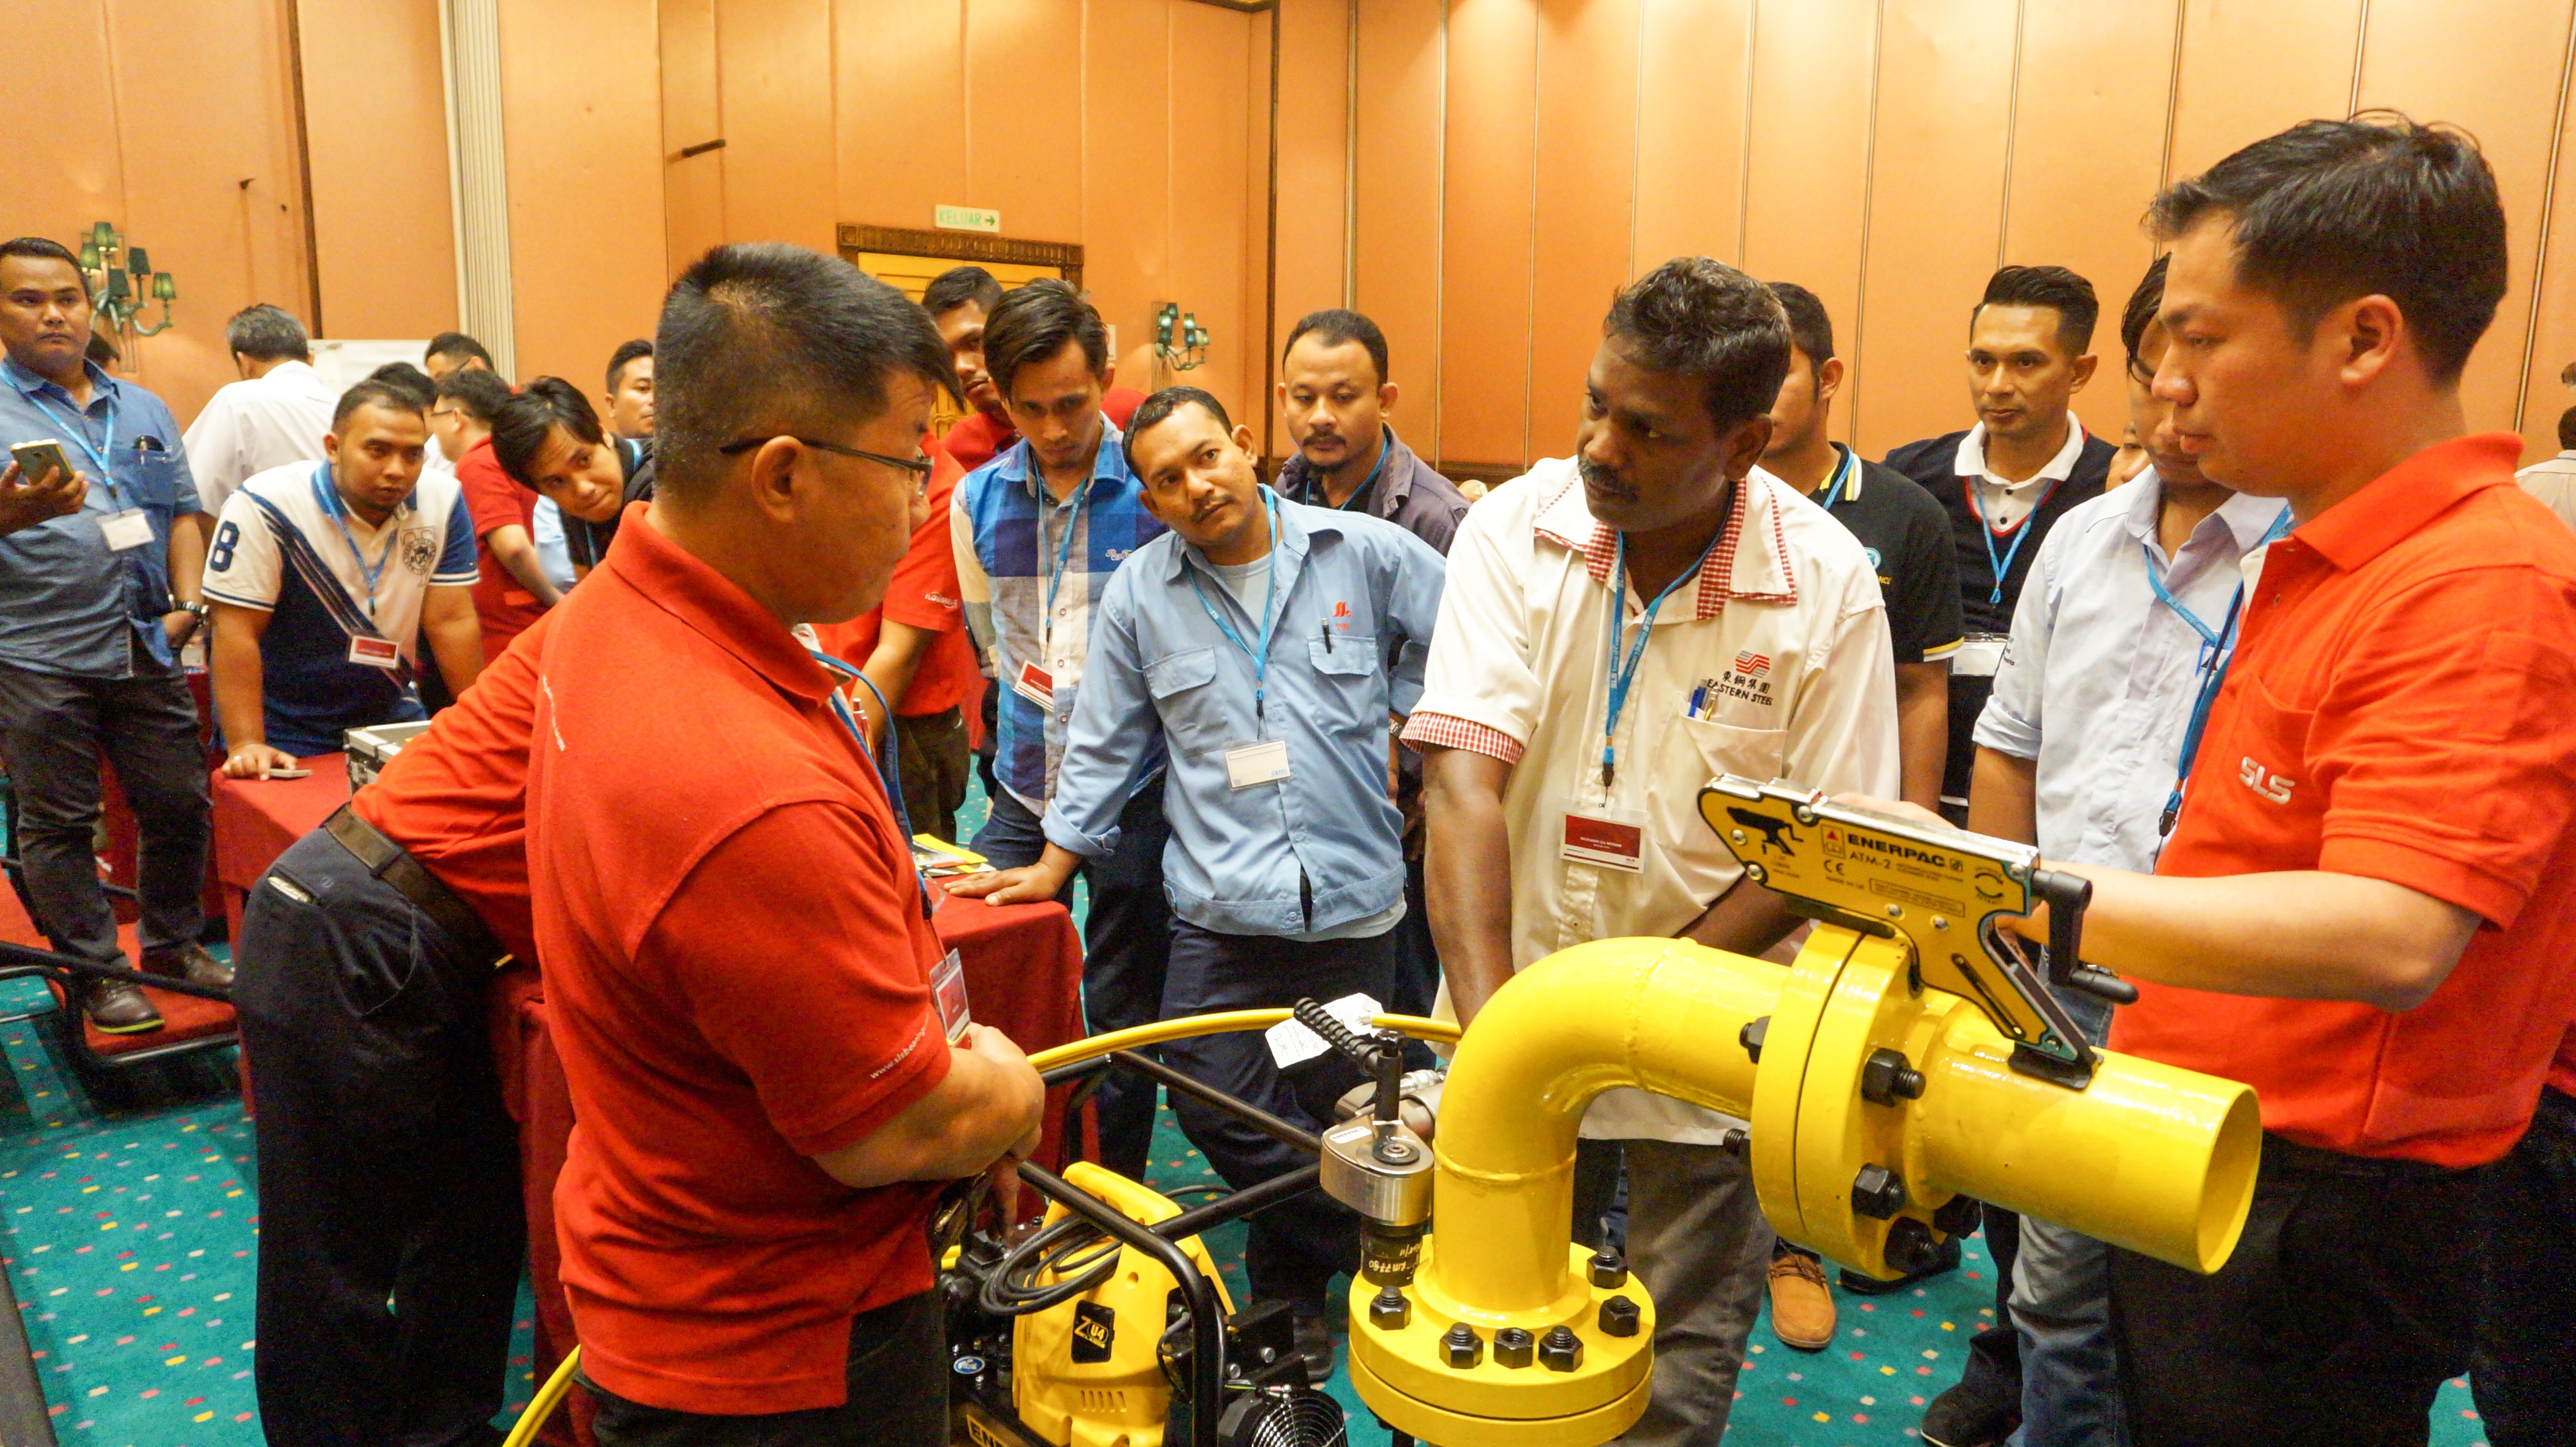 Image shows an SLS engineer explaining hydraulic equipment to a group of customers